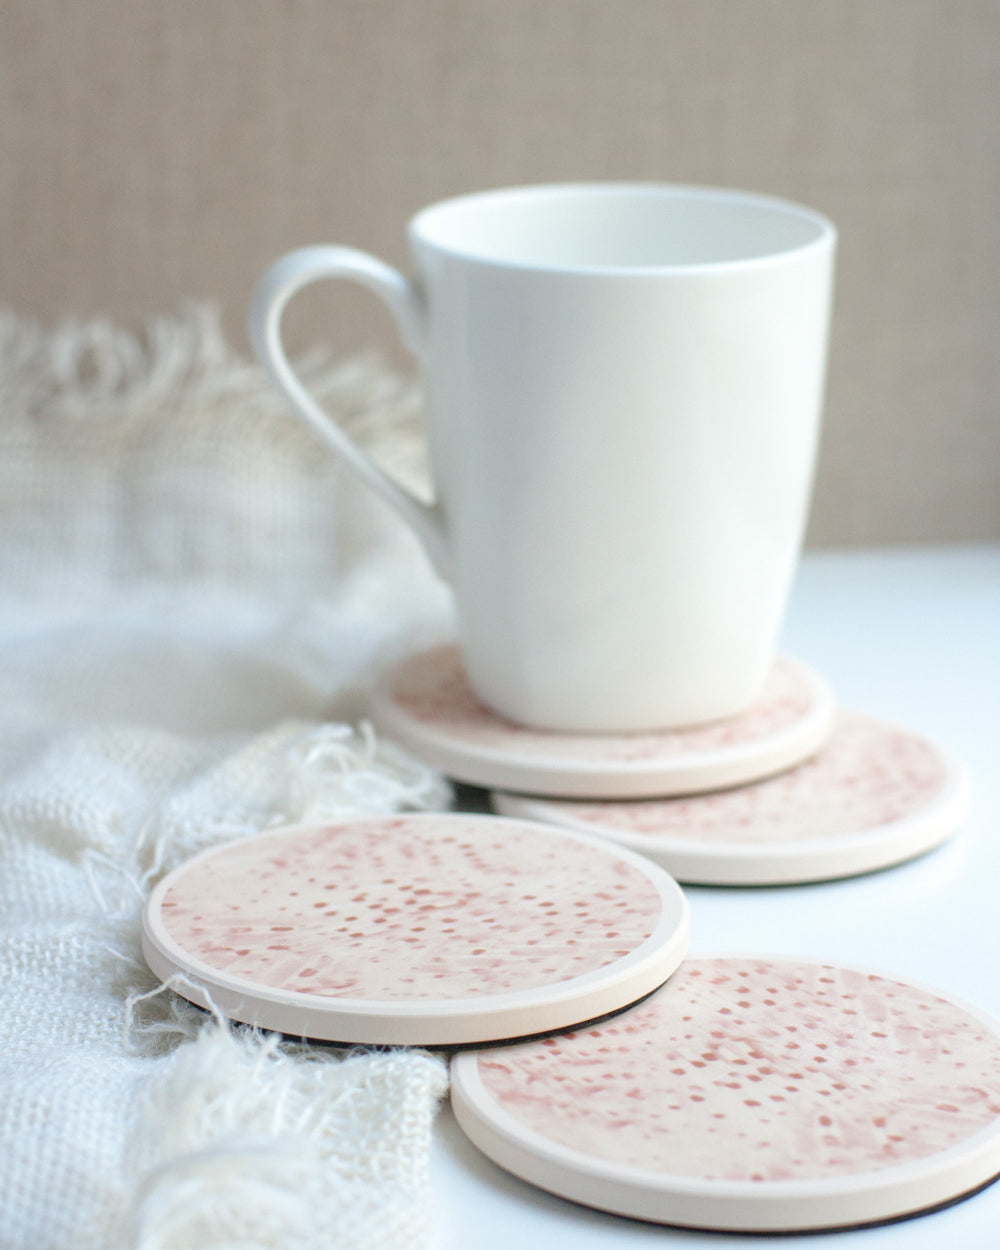 Ceramic Coasters, Pale Pink Dots - Gather Goods Co - Raleigh, NC